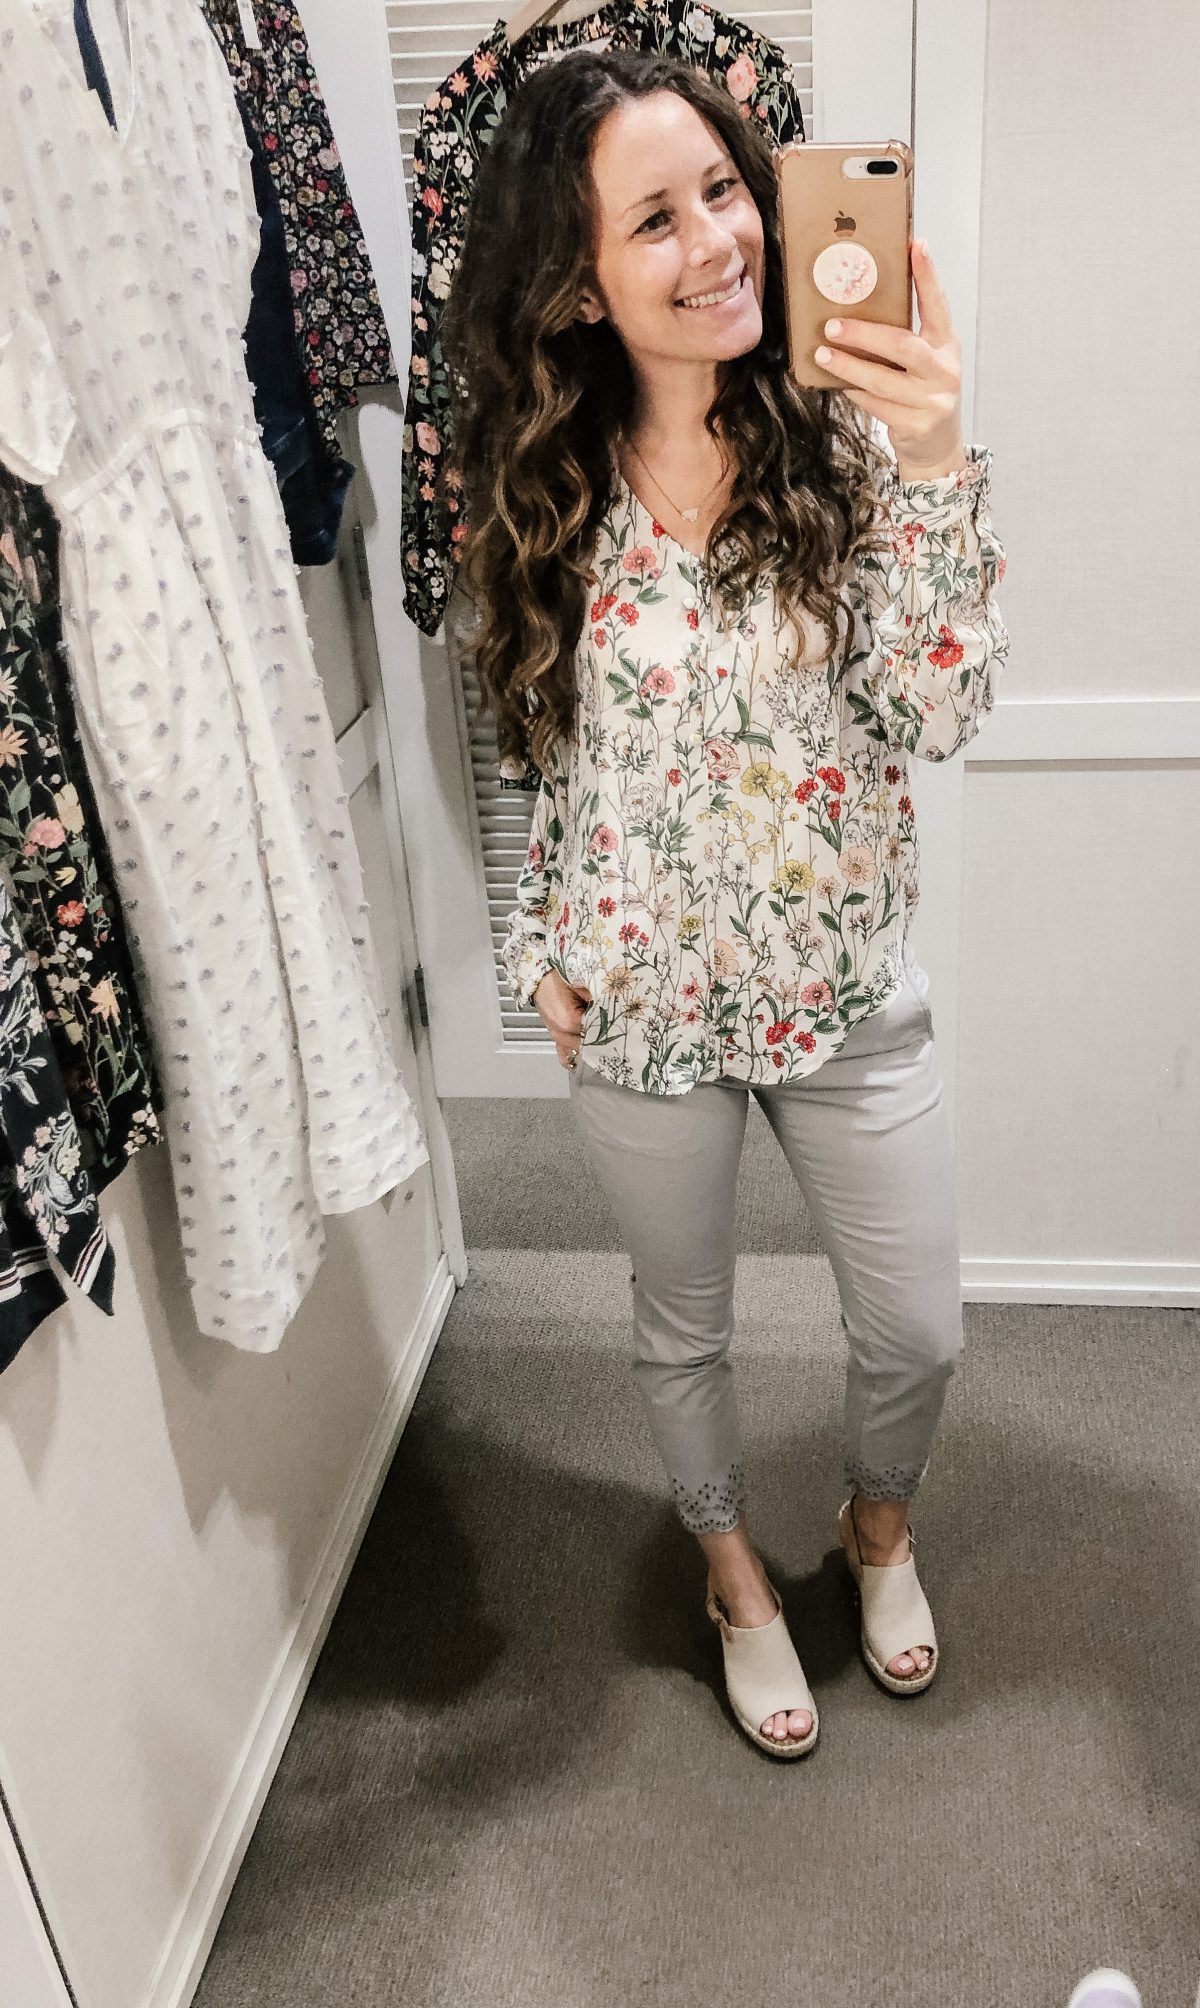 White Floral Long Sleeve Top and Gray Cropped Pants with Eyelet Hem on Woman at LOFT Confessions of a Northern Belle